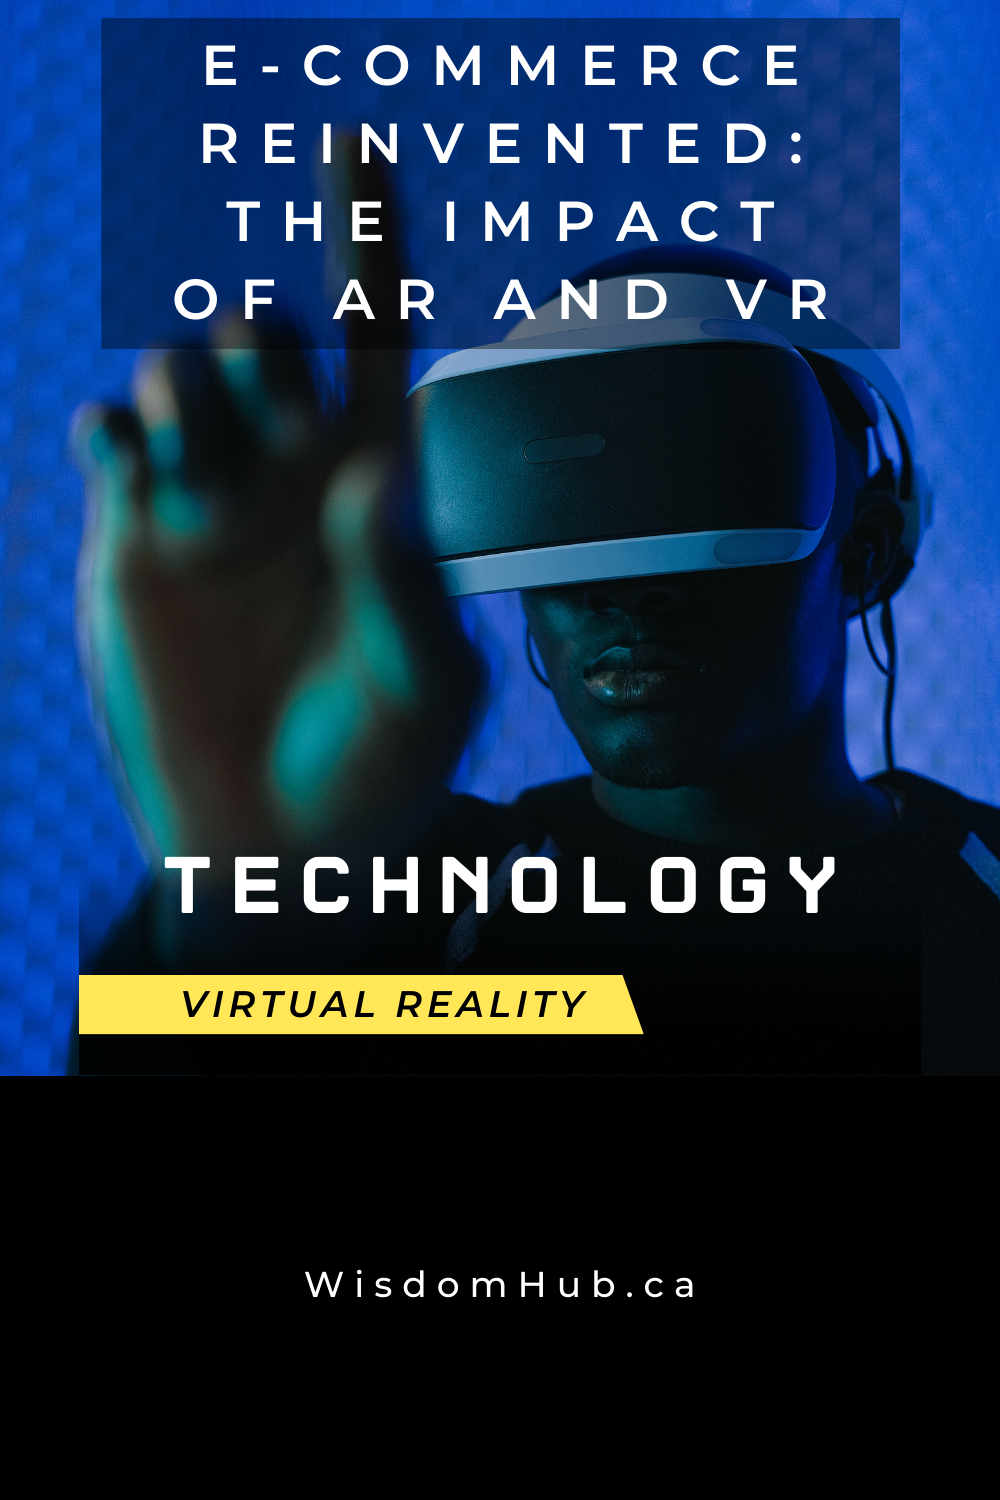 E-commerce Reinvented: The Impact of AR and VR